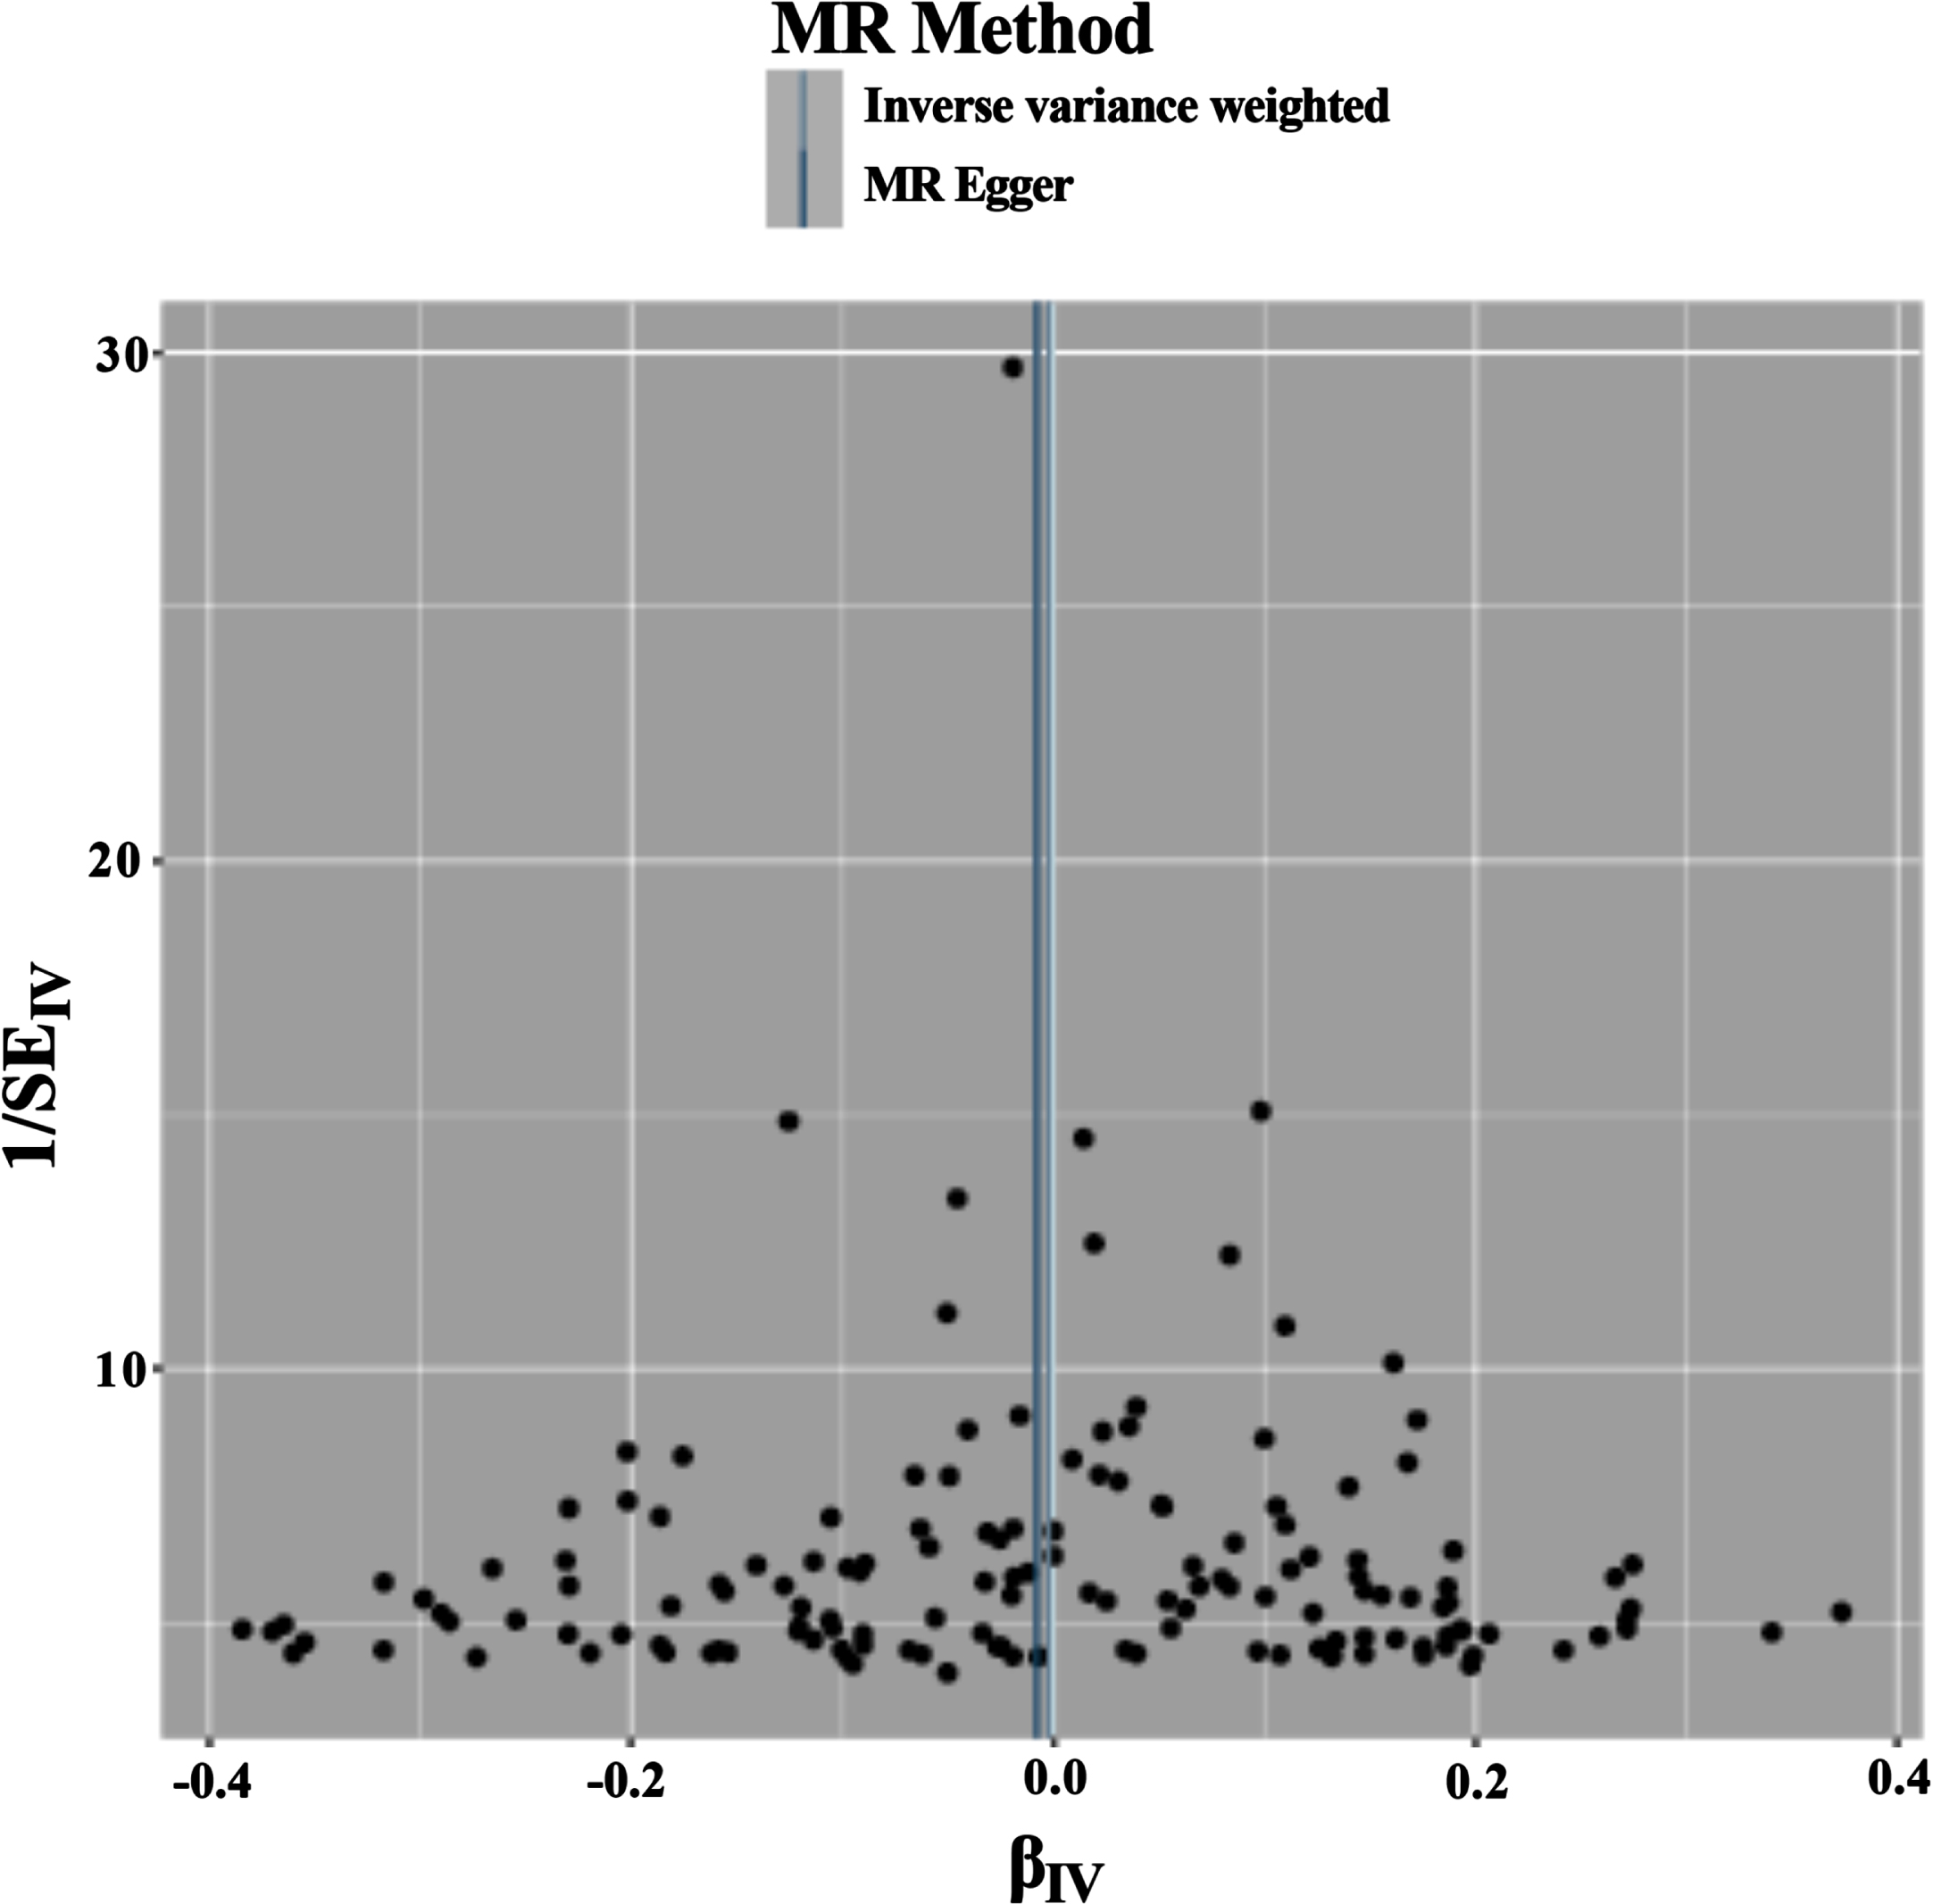 Funnel plot of the results of the heterogeneity test for forward MR method analysis. The funnel plot demonstrates that a single SNP is a causally relevant point for IV generation and exhibits a symmetrical distribution, suggesting minimal variation between IVs. MR Method, Mendelian Randomization Method; MR Egger, Mendelian Randomization Egger; IV, instrumental variables.